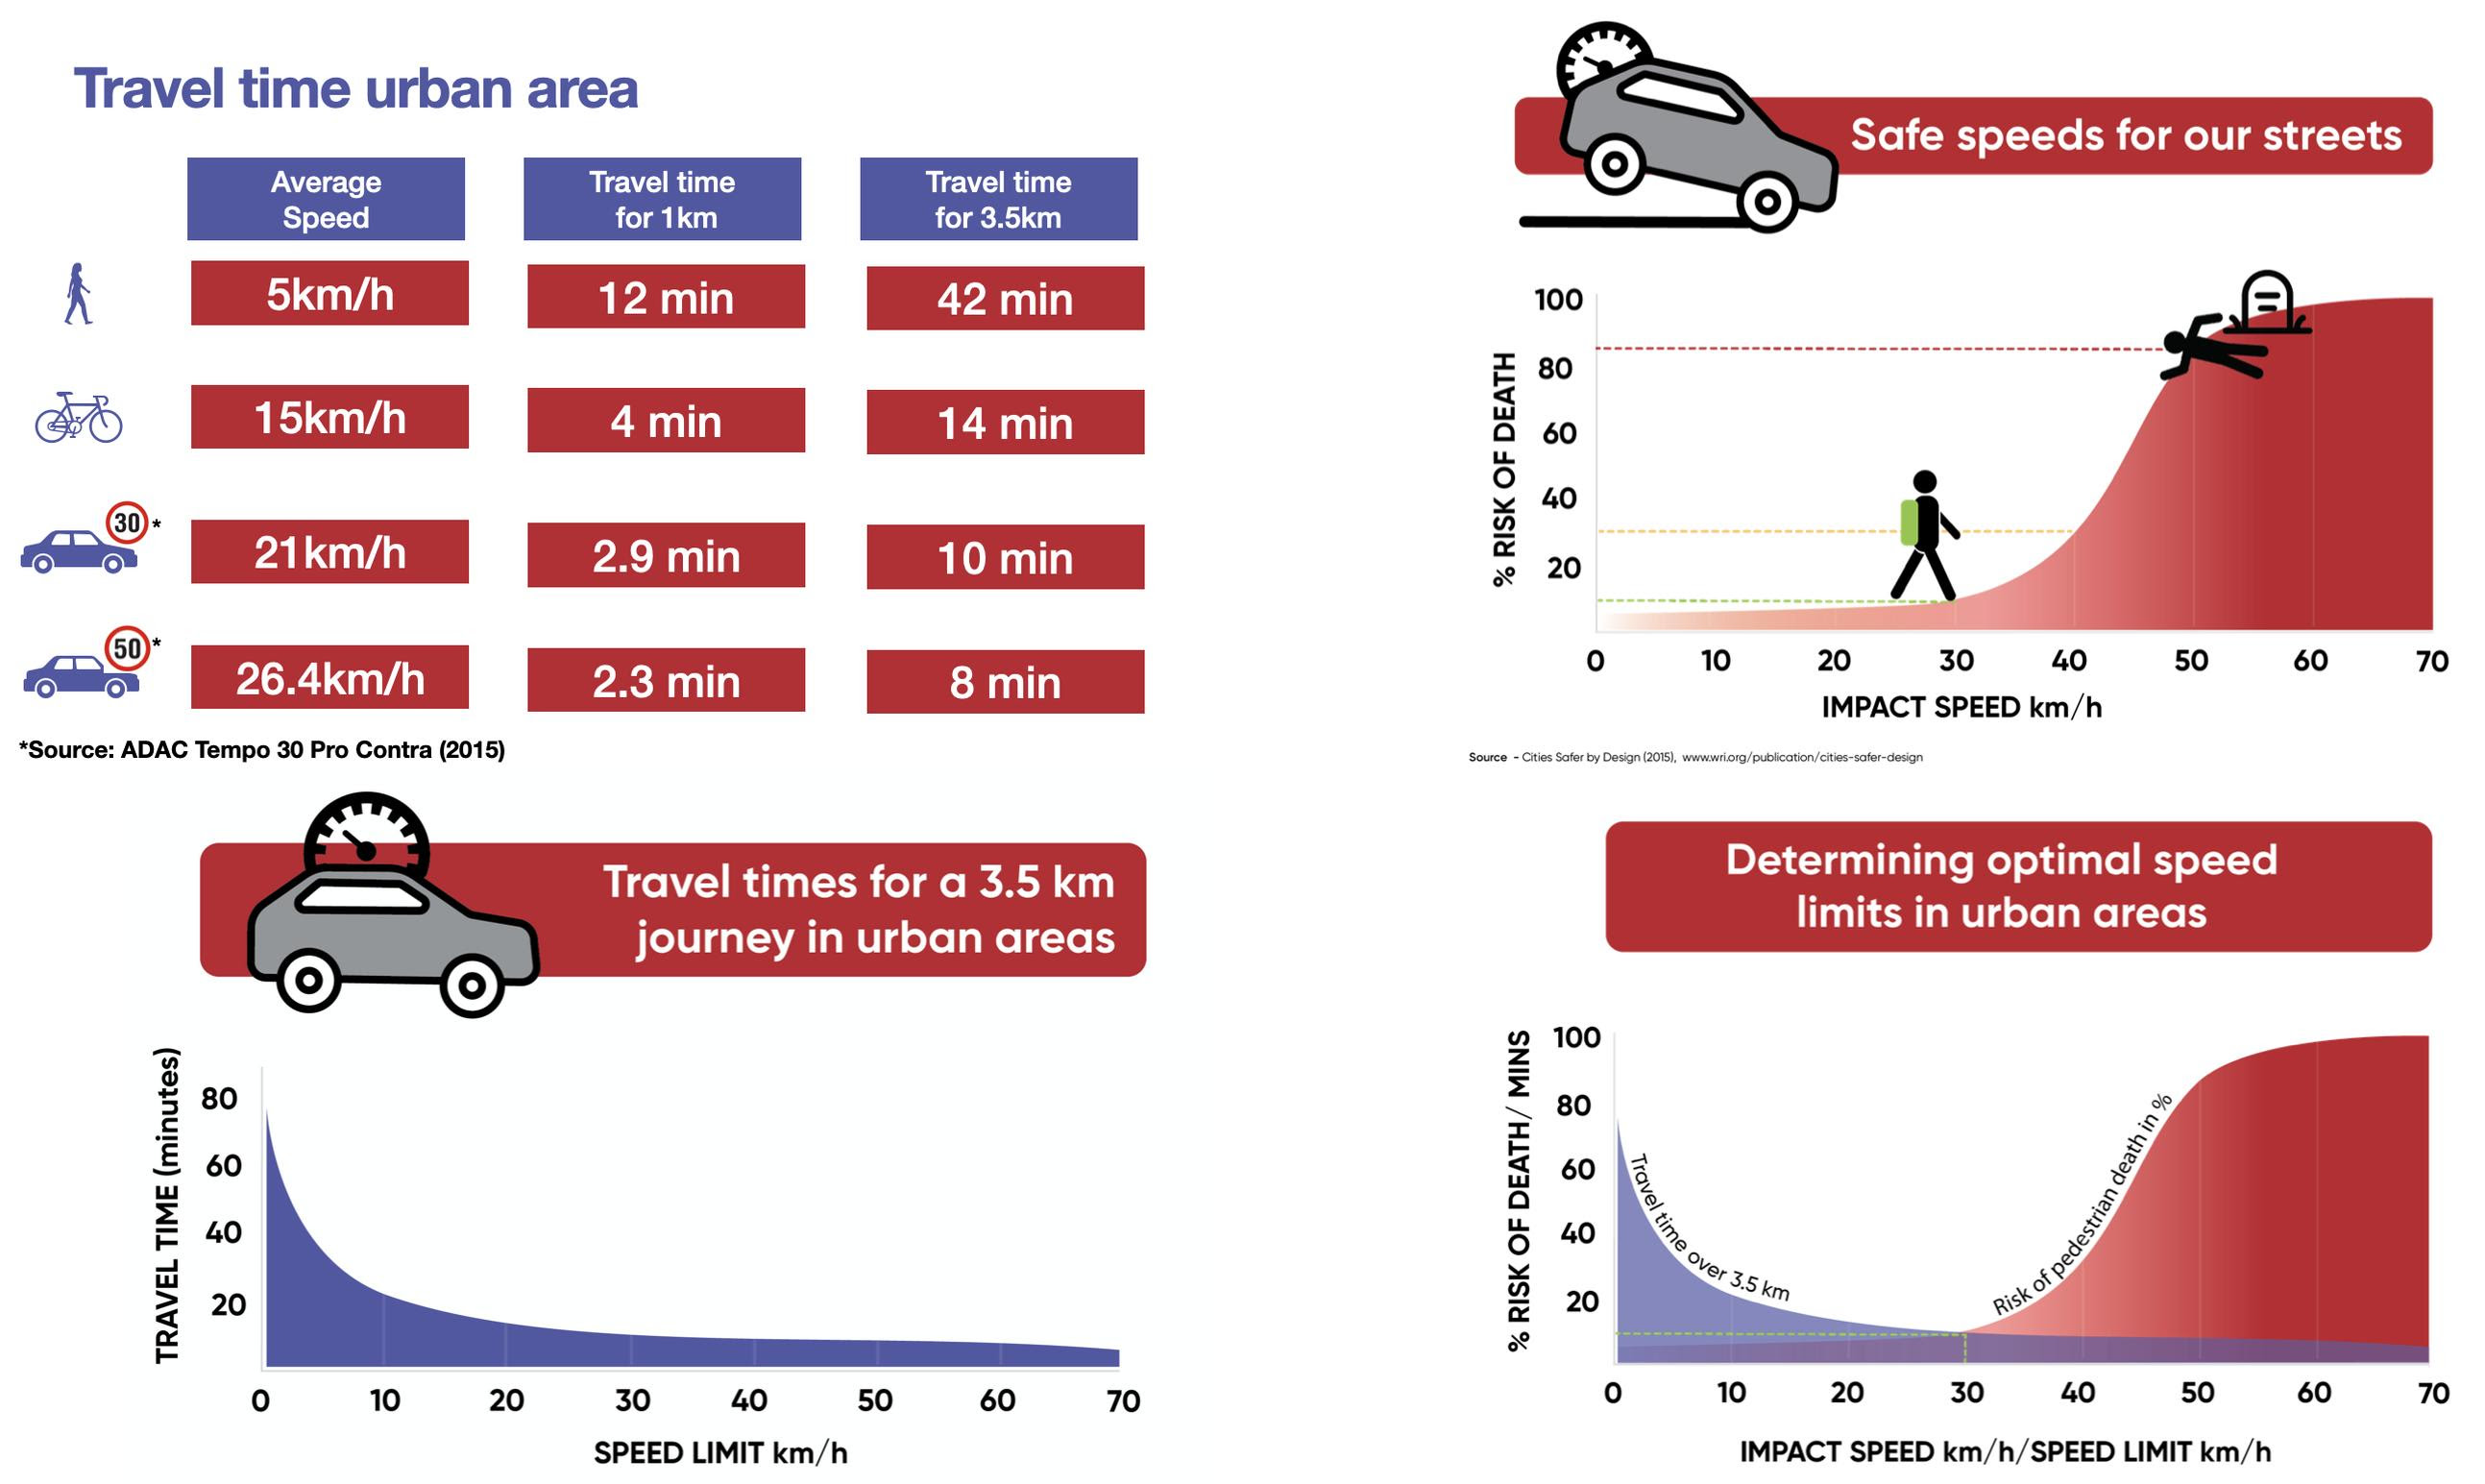 Many drivers over-estimate the impact a 30km/h limit would have on their travel time